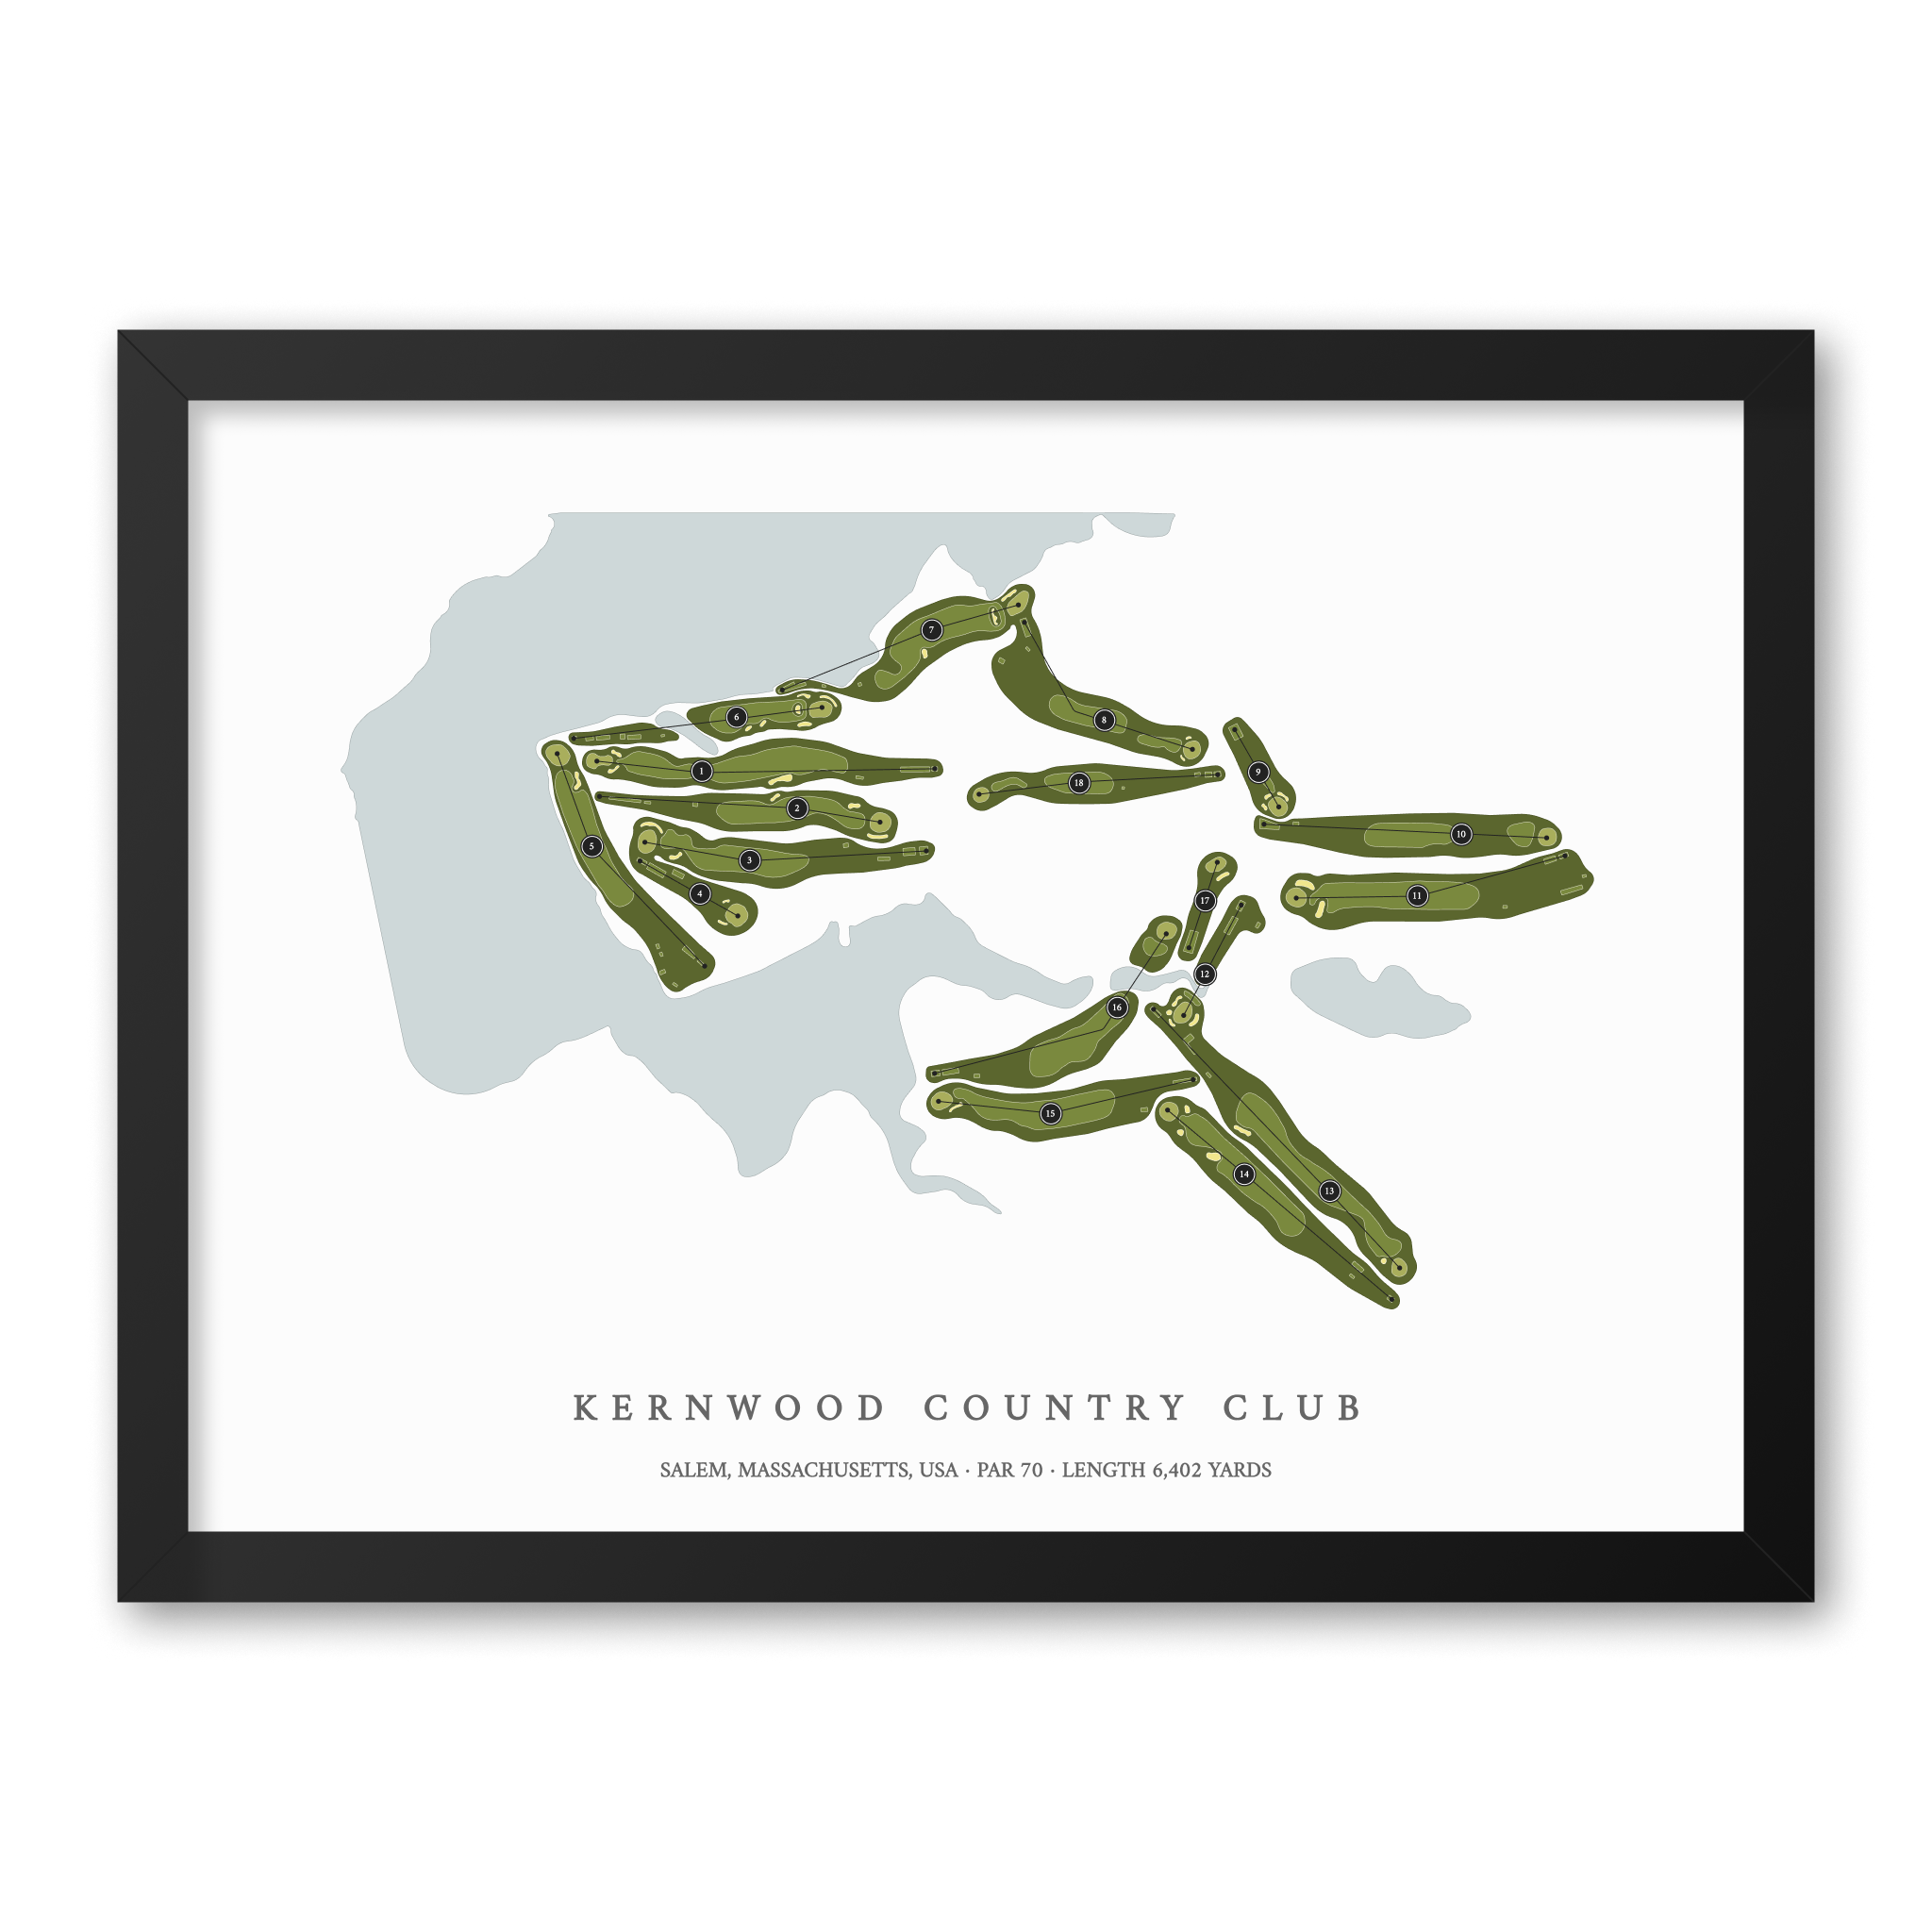 Kernwood Country Club| Golf Course Print | Black Frame With Hole Numbers #hole numbers_yes